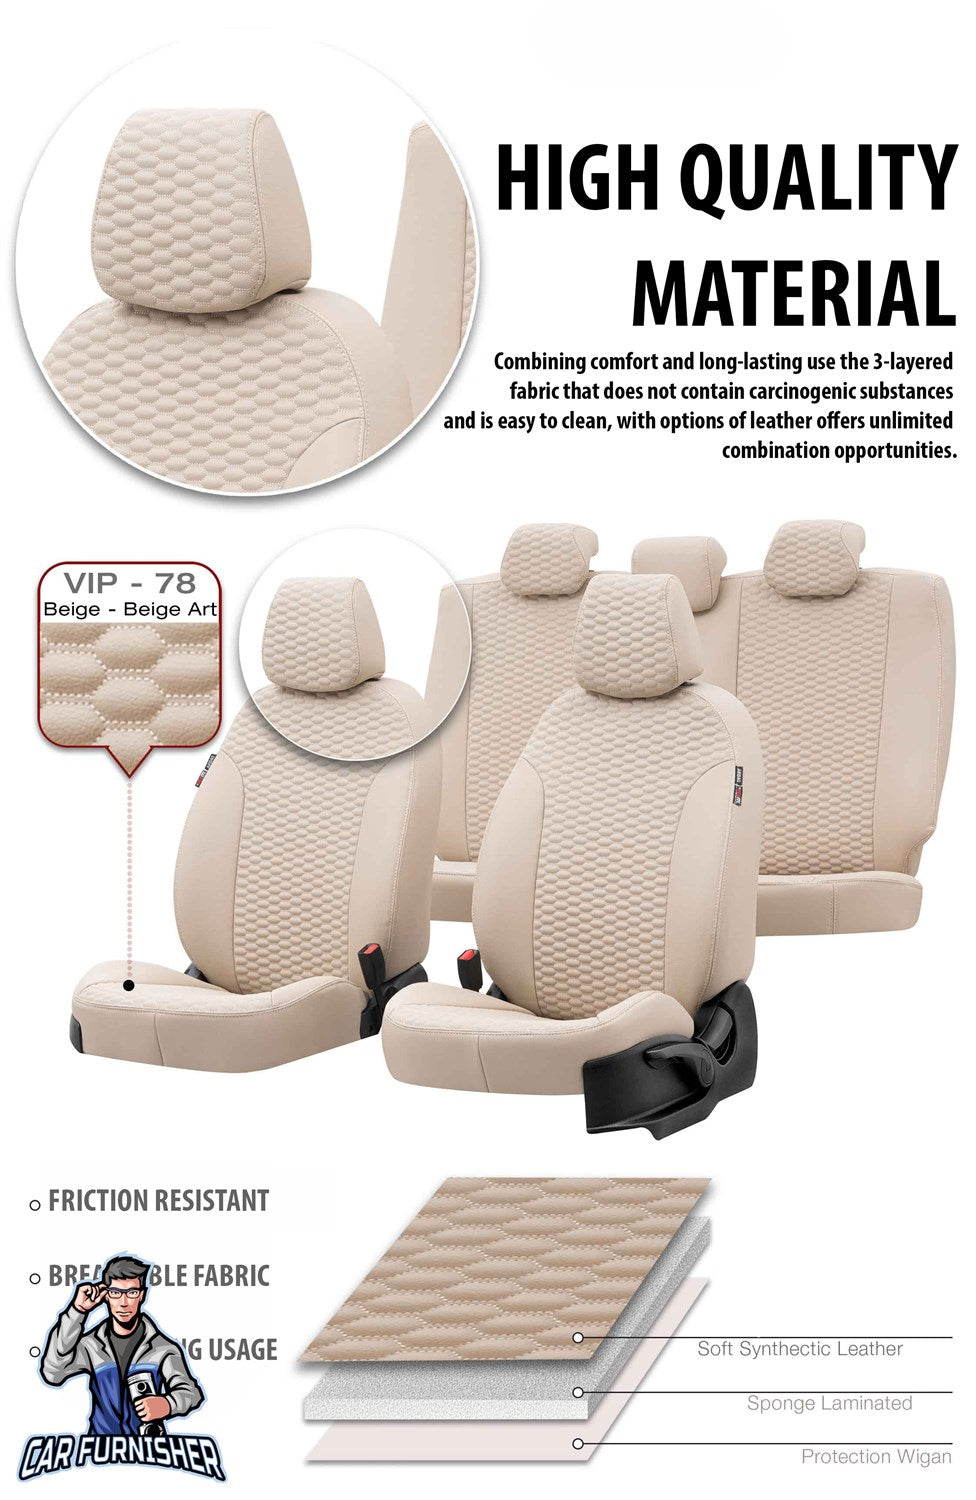 Isuzu D-Max Seat Covers Tokyo Leather Design Ivory Leather